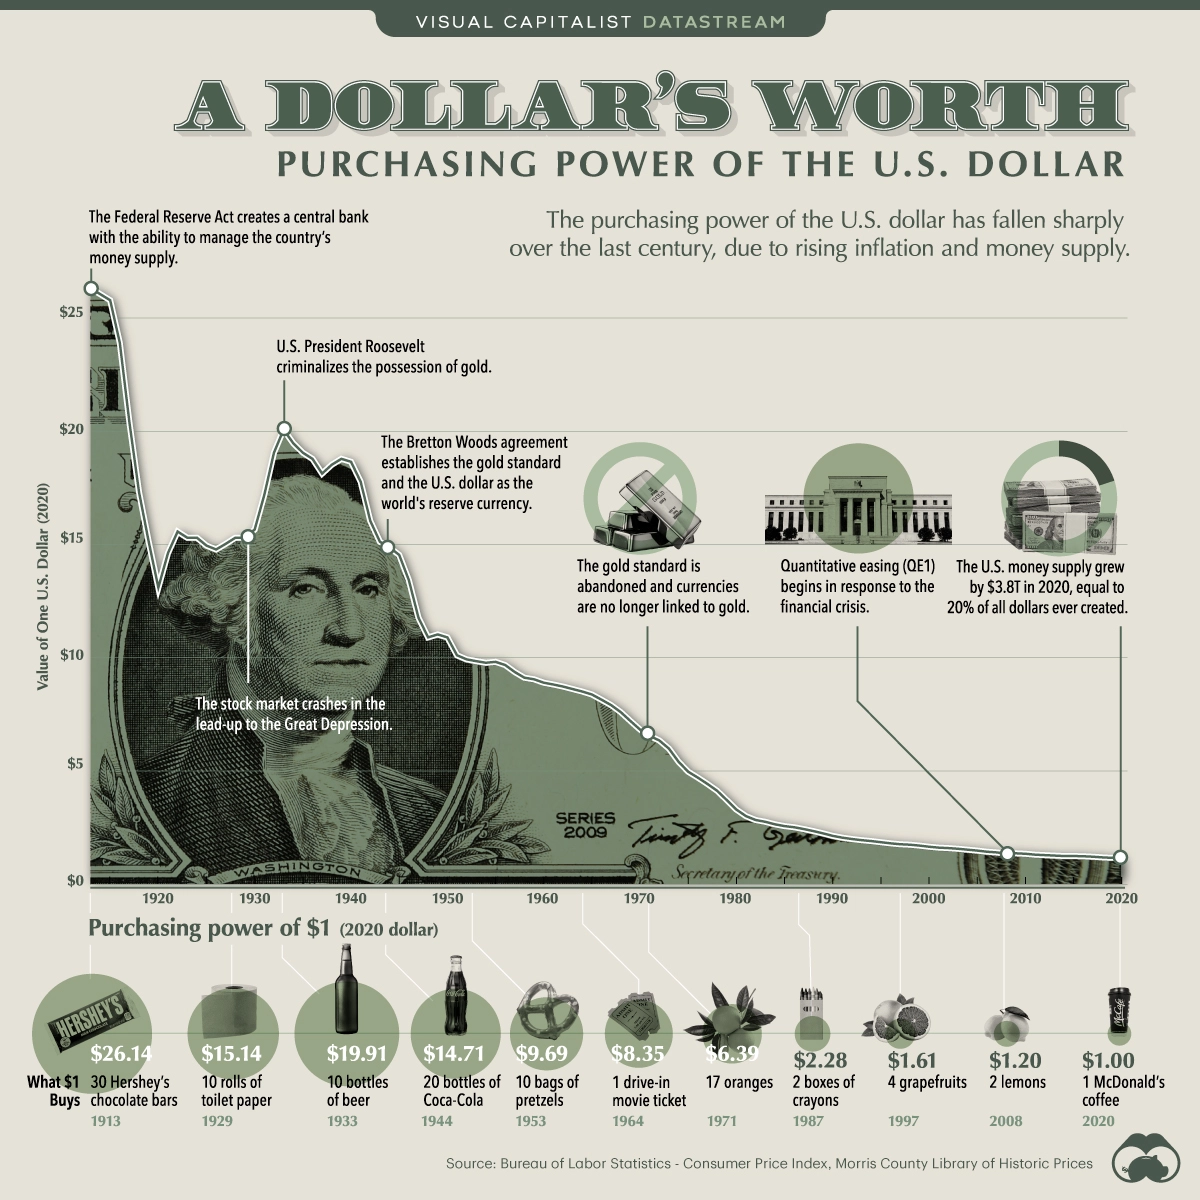 Purchasing Power of the U.S. Dollar Over Time